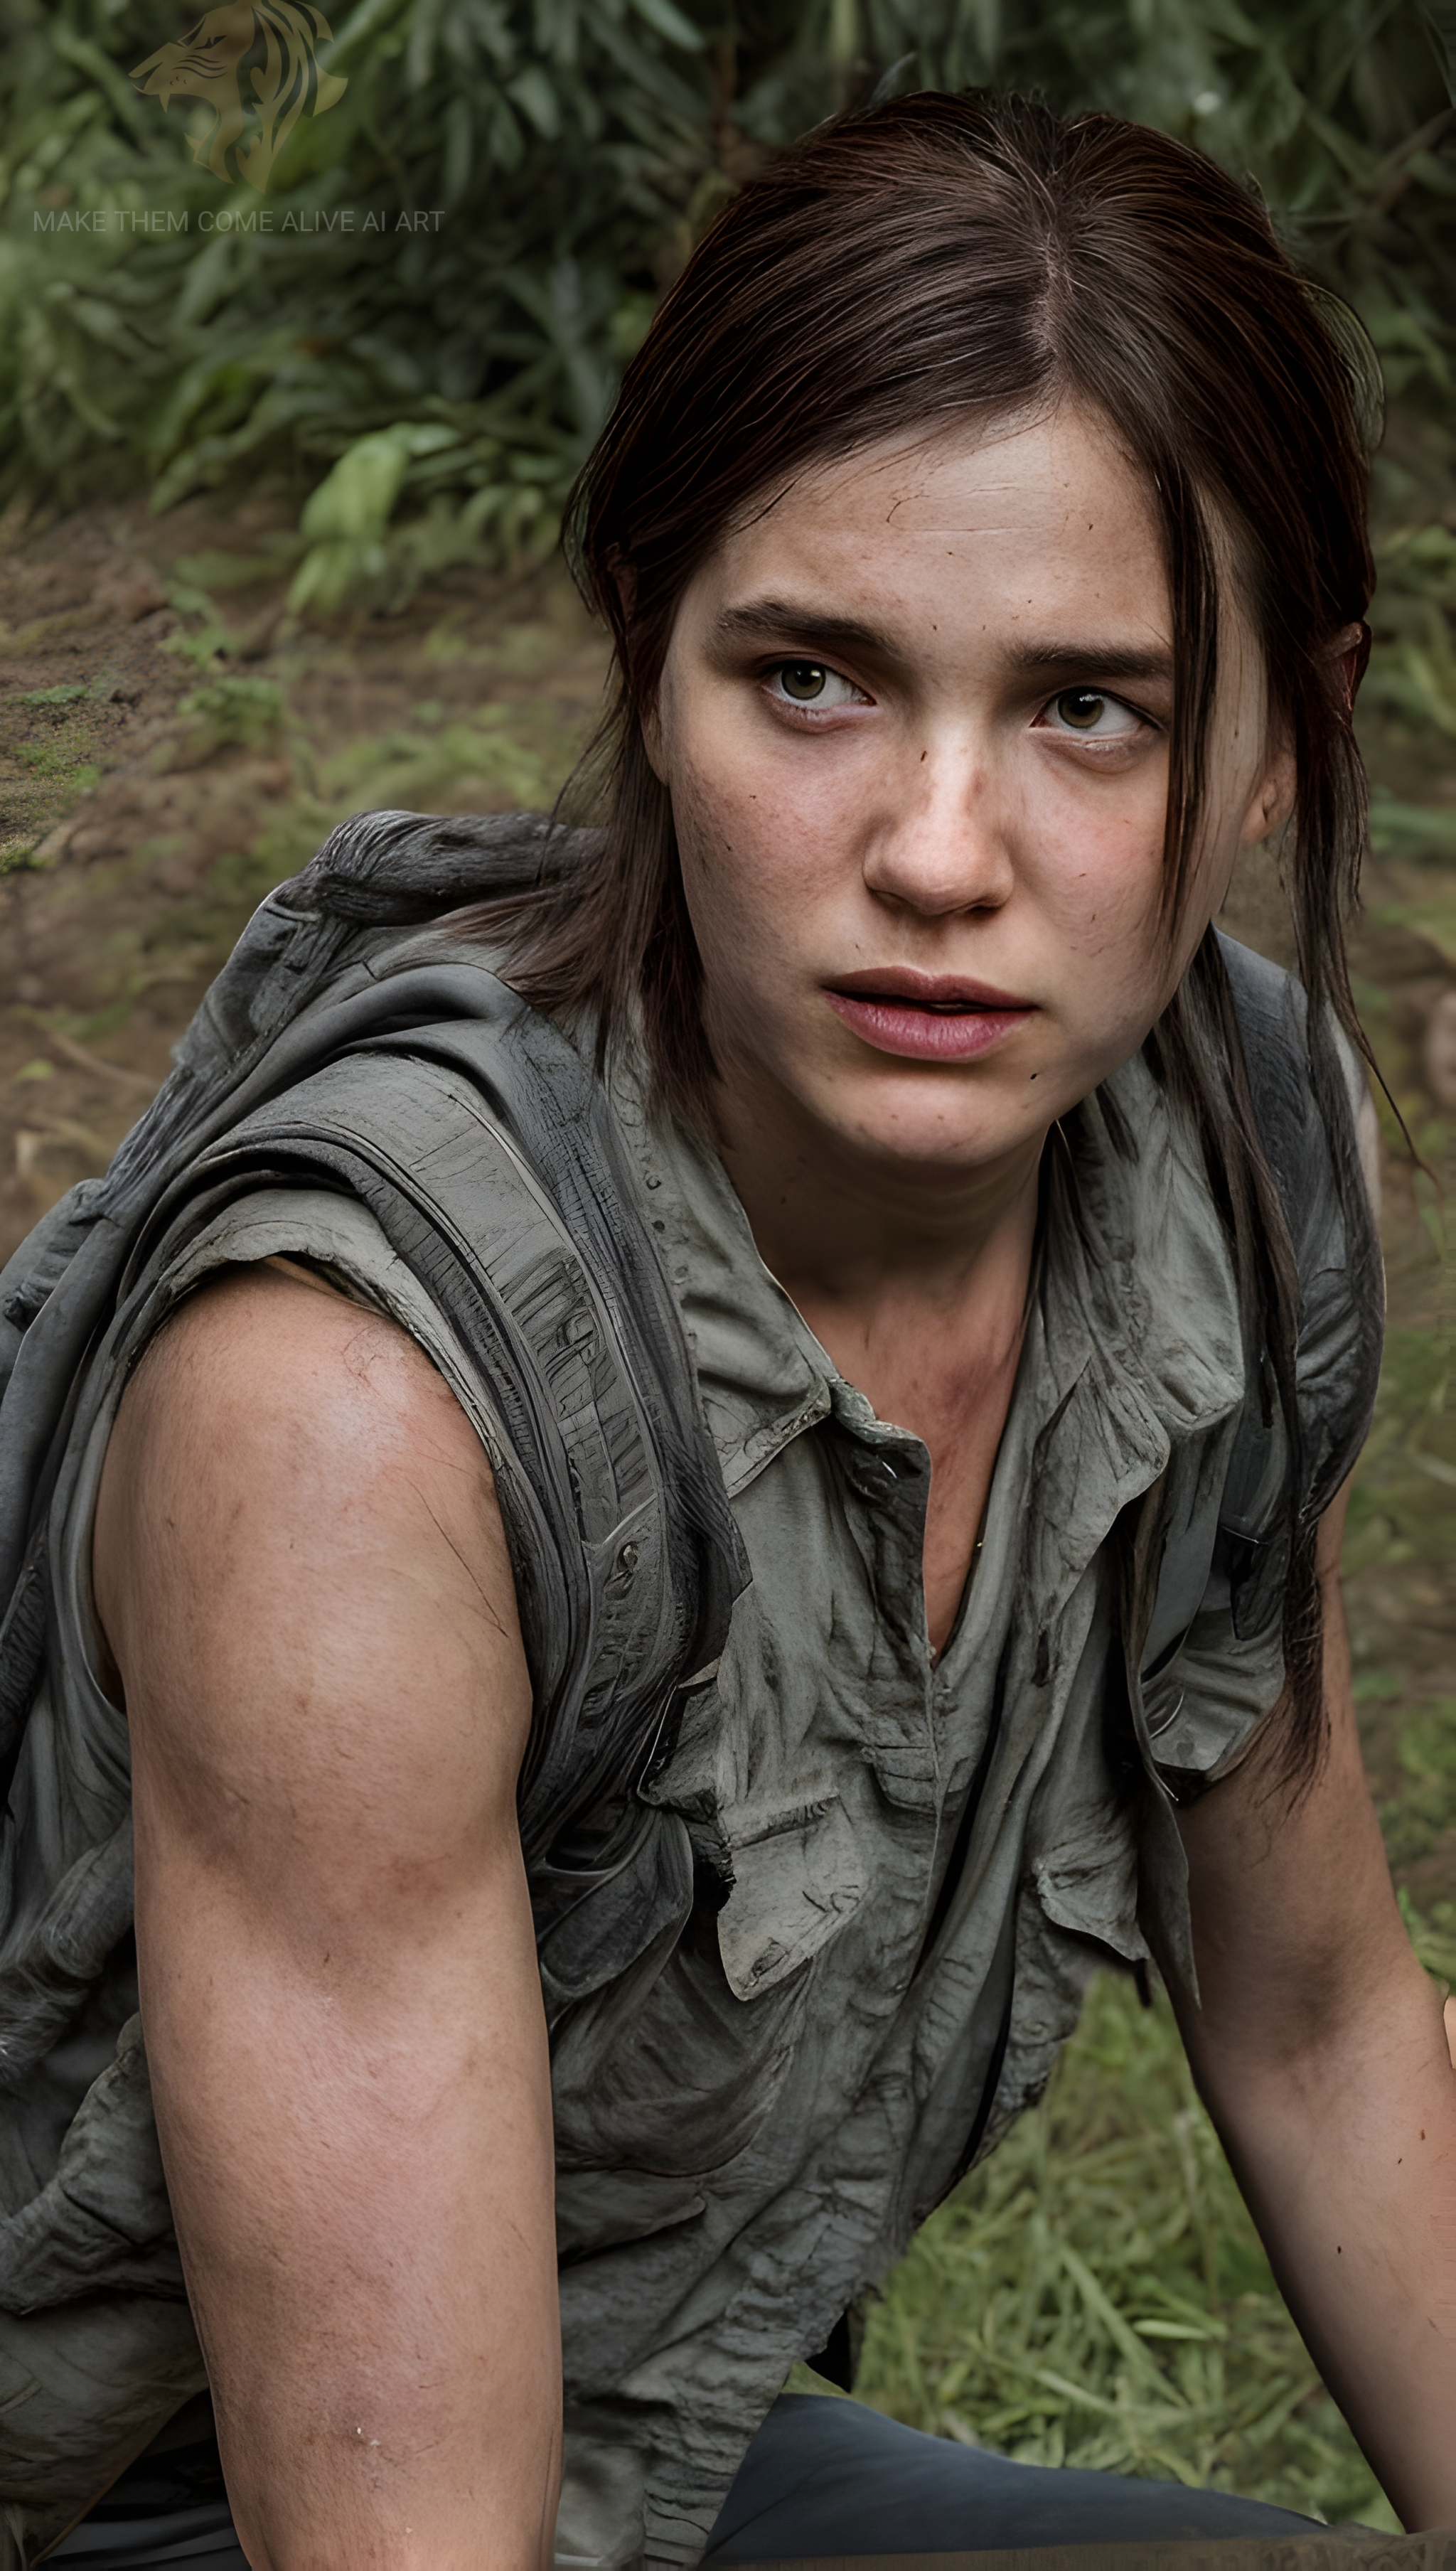 The Last of Us 2 Cosplay - Ellie Williams by LessiWho on DeviantArt